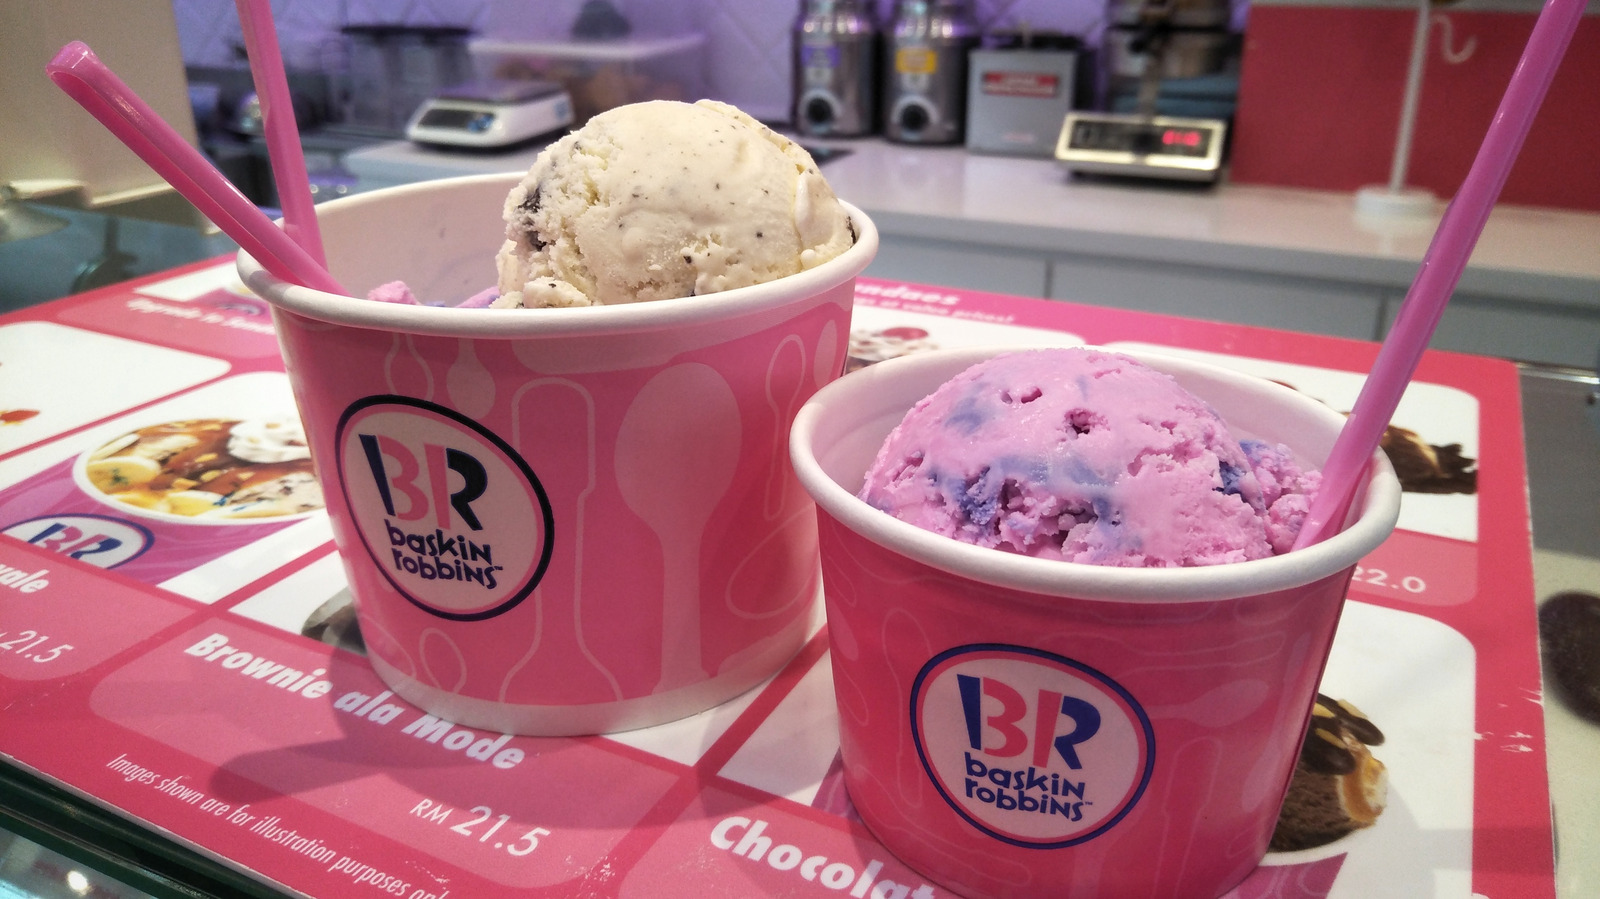 The Bizarre Topping Baskin Robbins Just Added To Their Menu